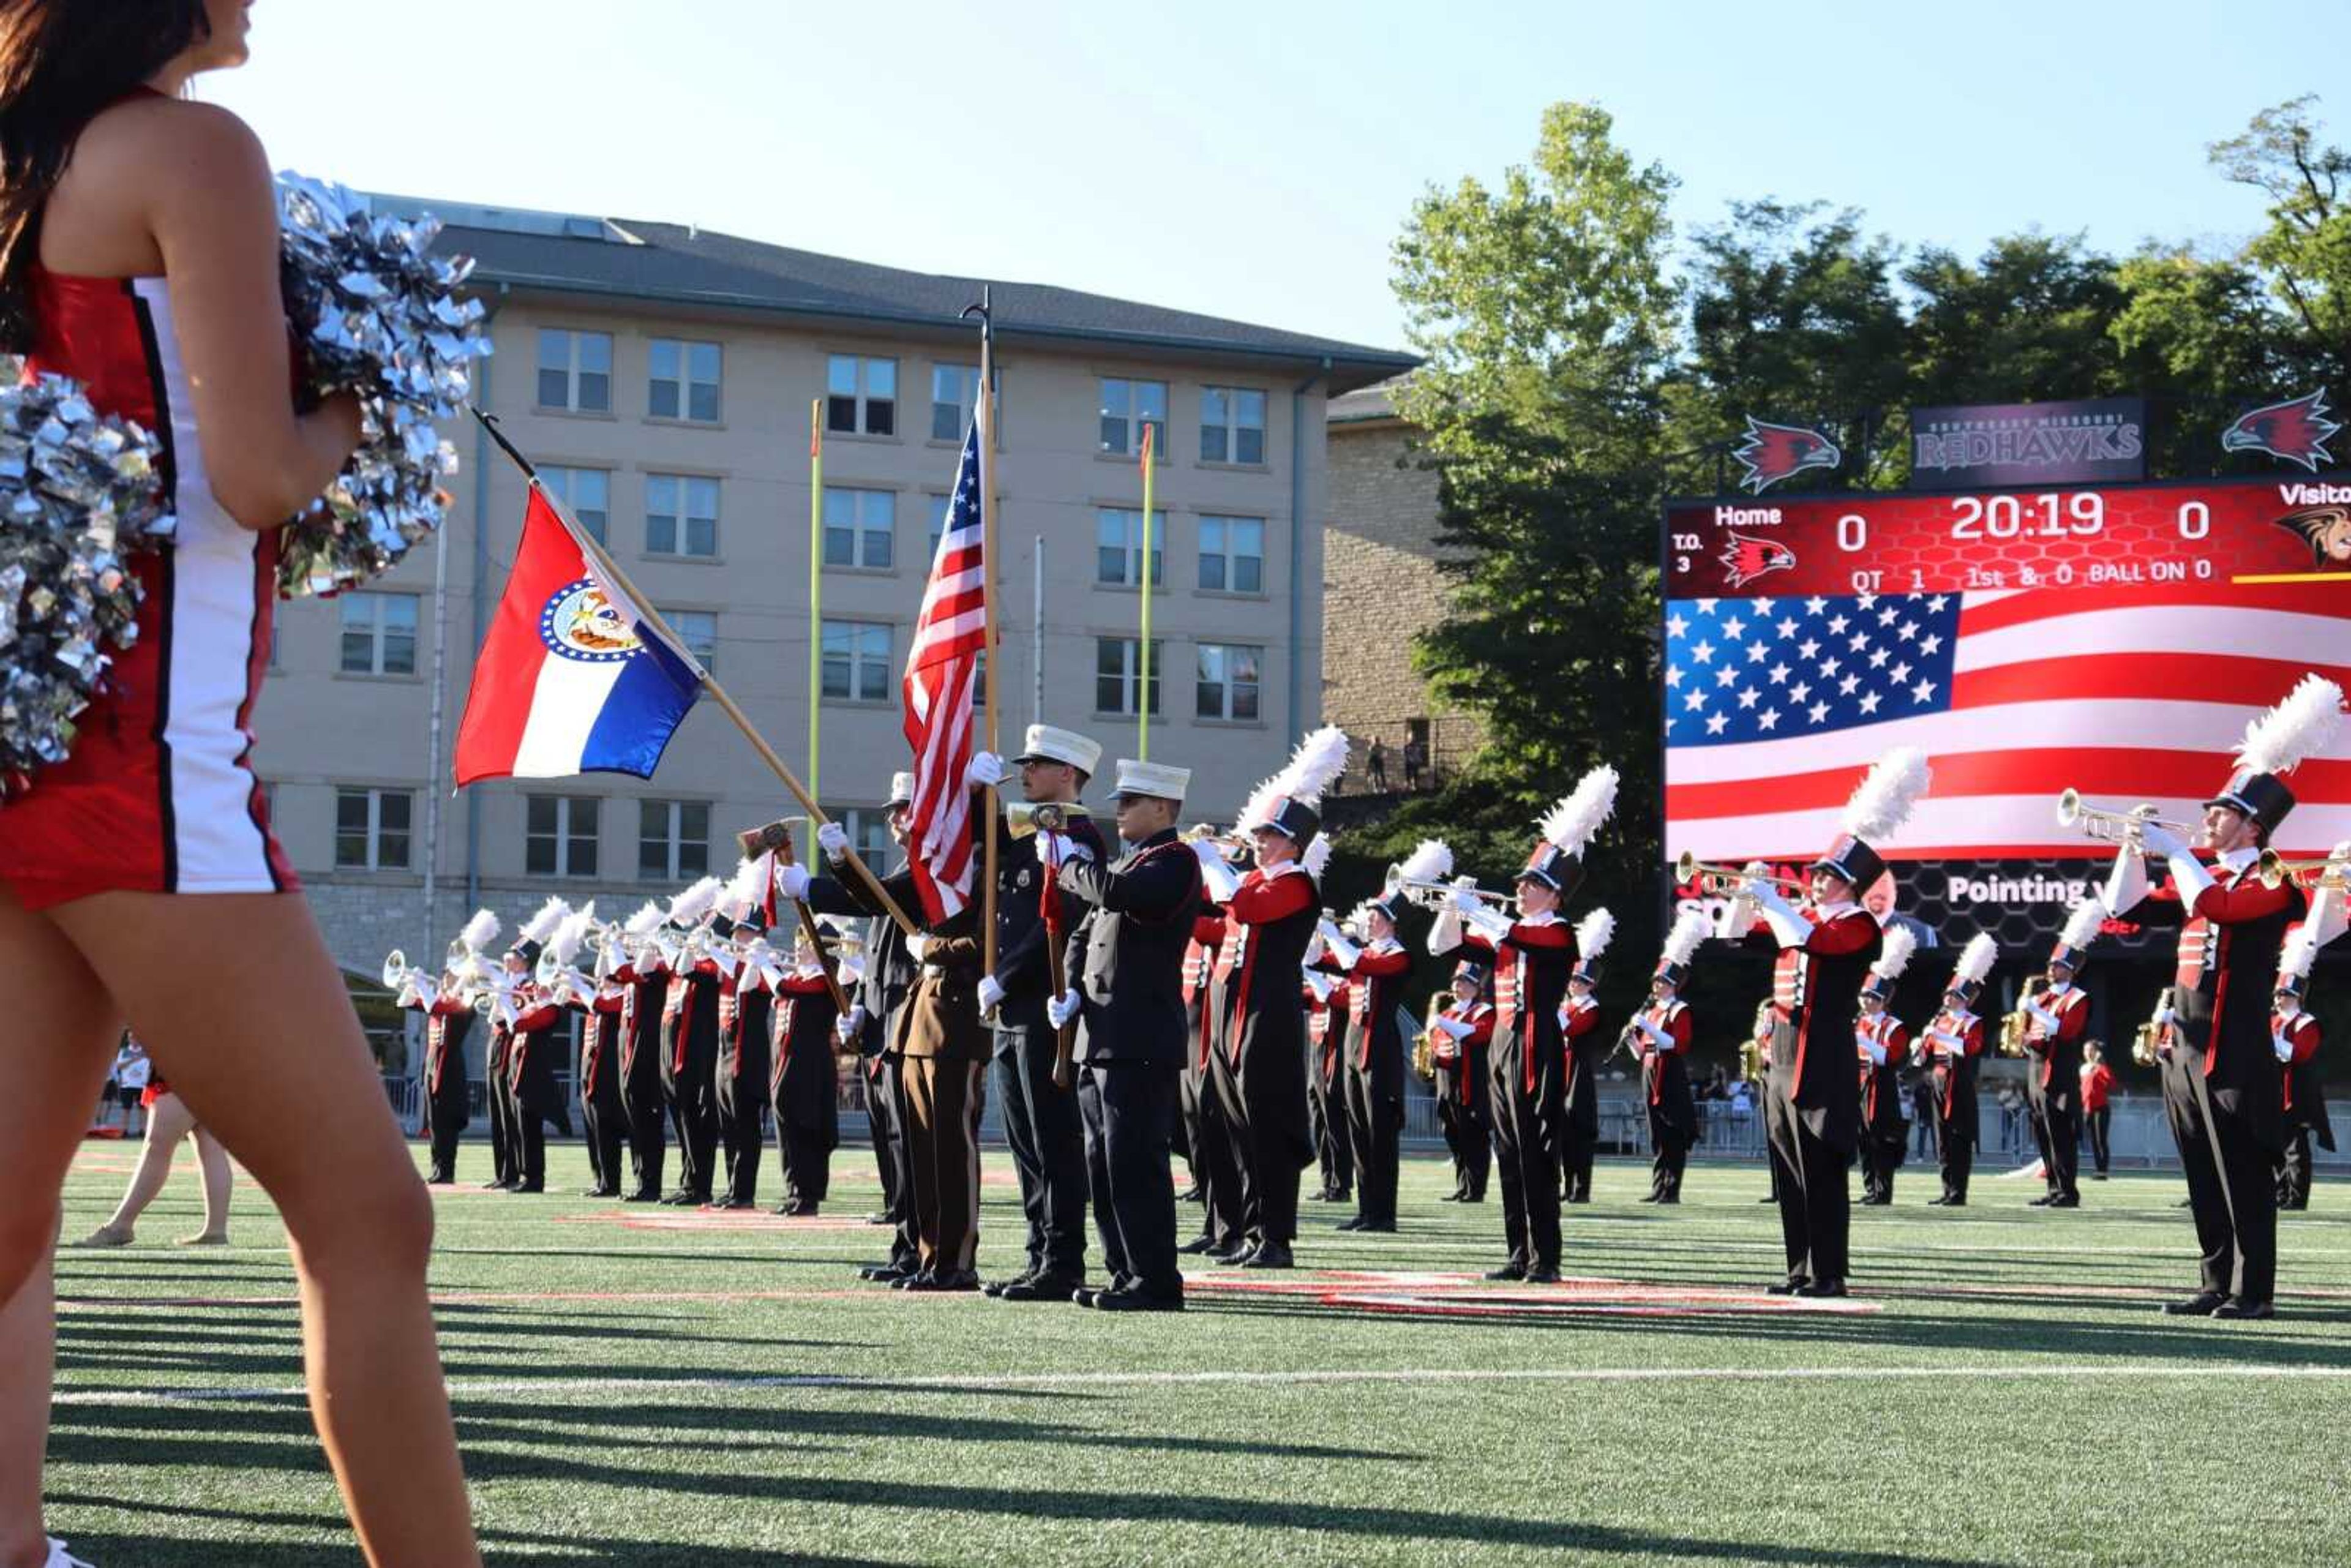 SEMO marching band executes their performance for the upcoming Bands of America Super Regional Championship event for spectators at the SEMO home football game on Sept. 9.